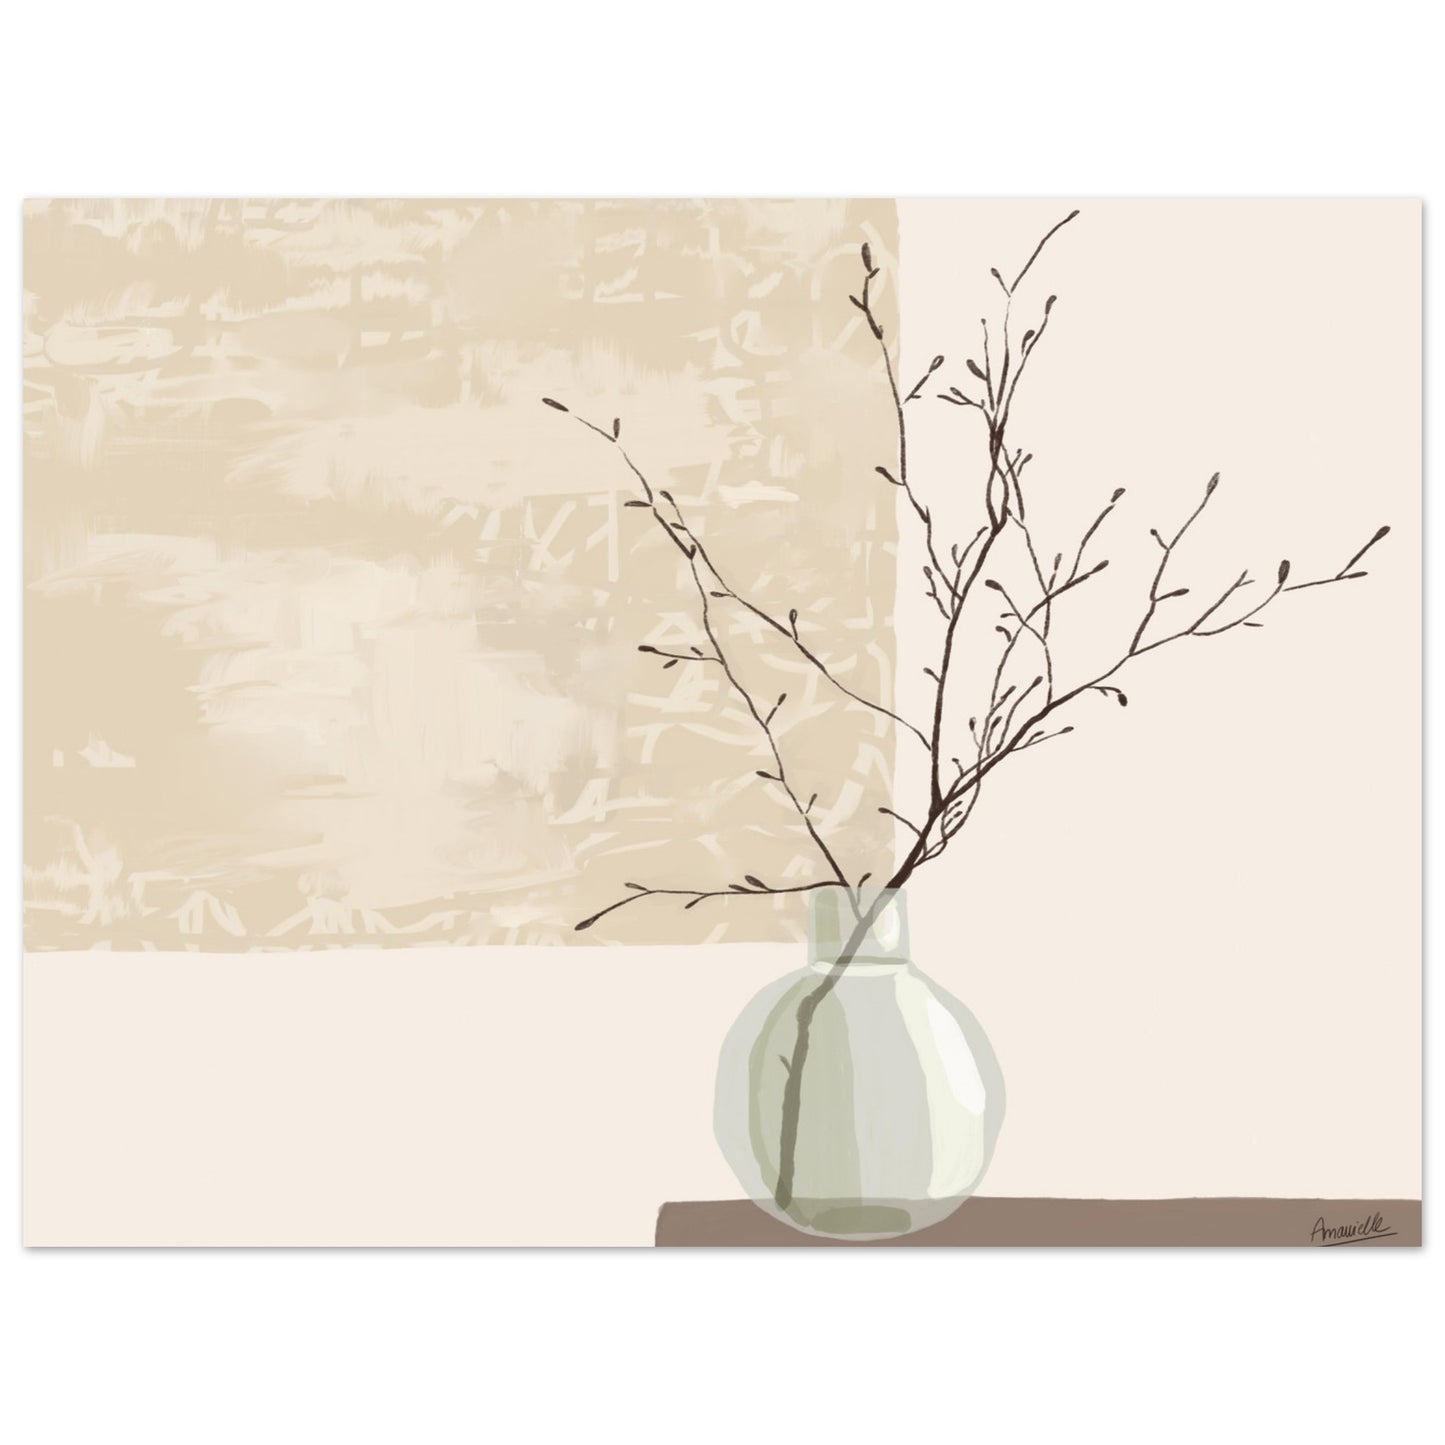 Japandi wall art vase and branches